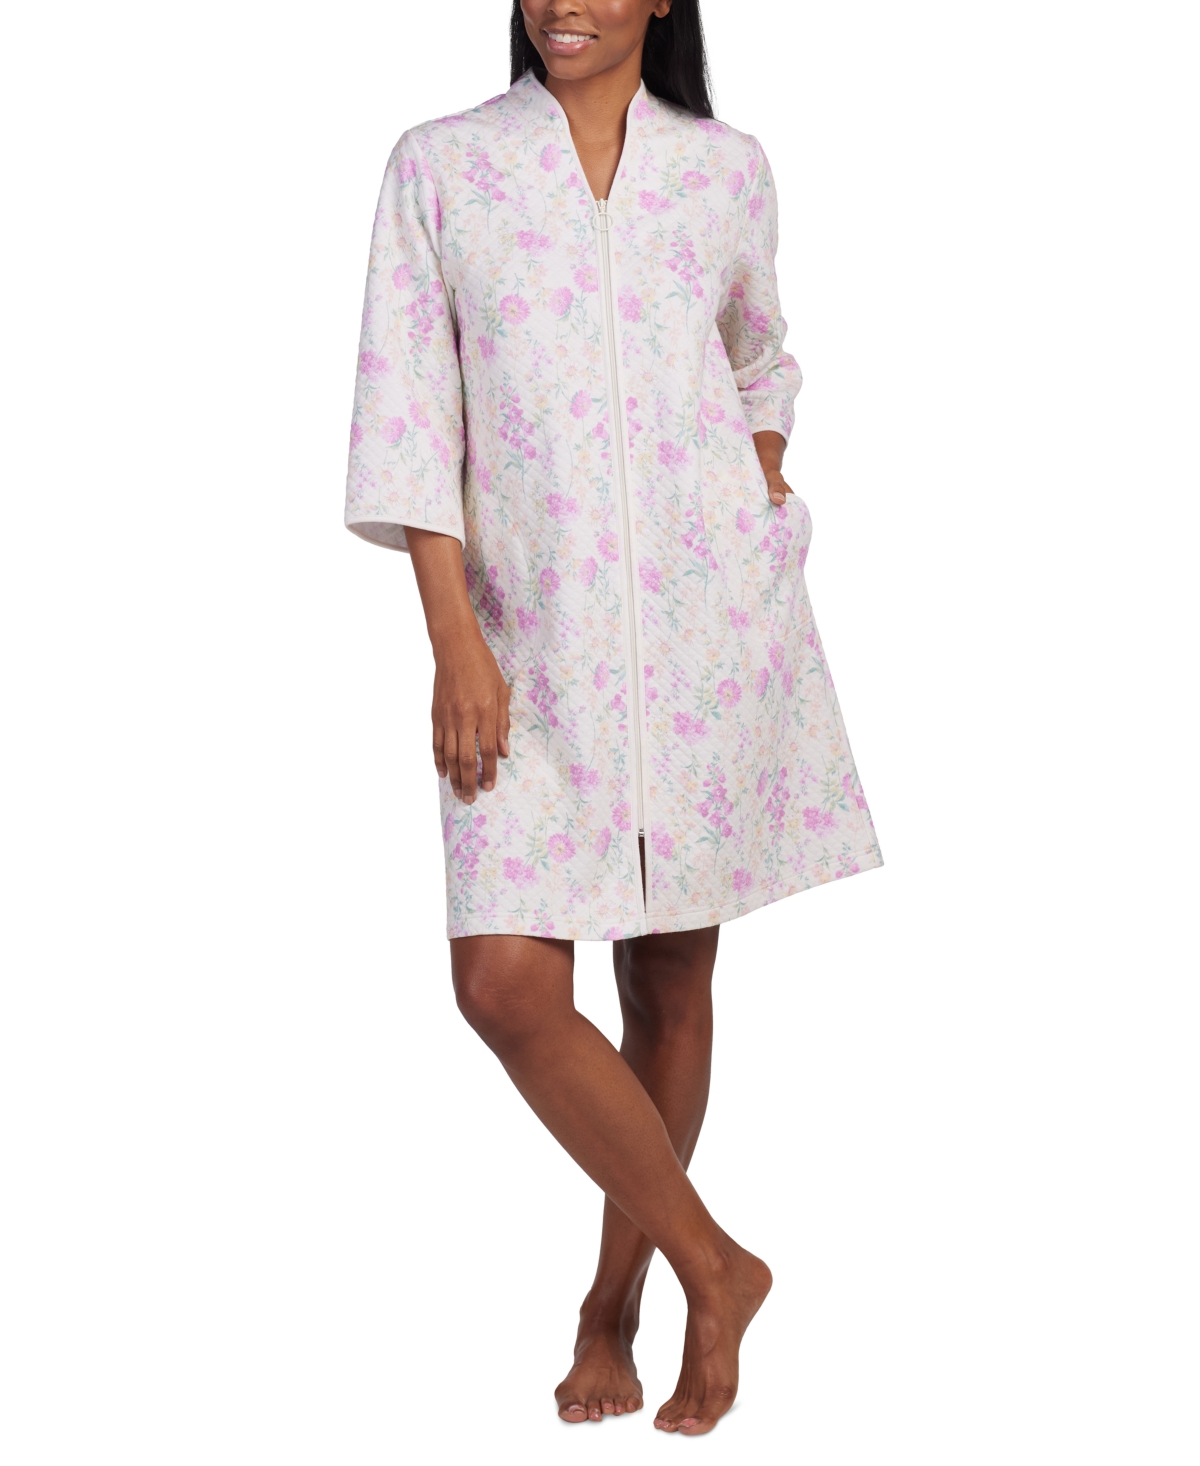 Women's Floral 3/4-Sleeve Zip-Front Robe - Pink Floral